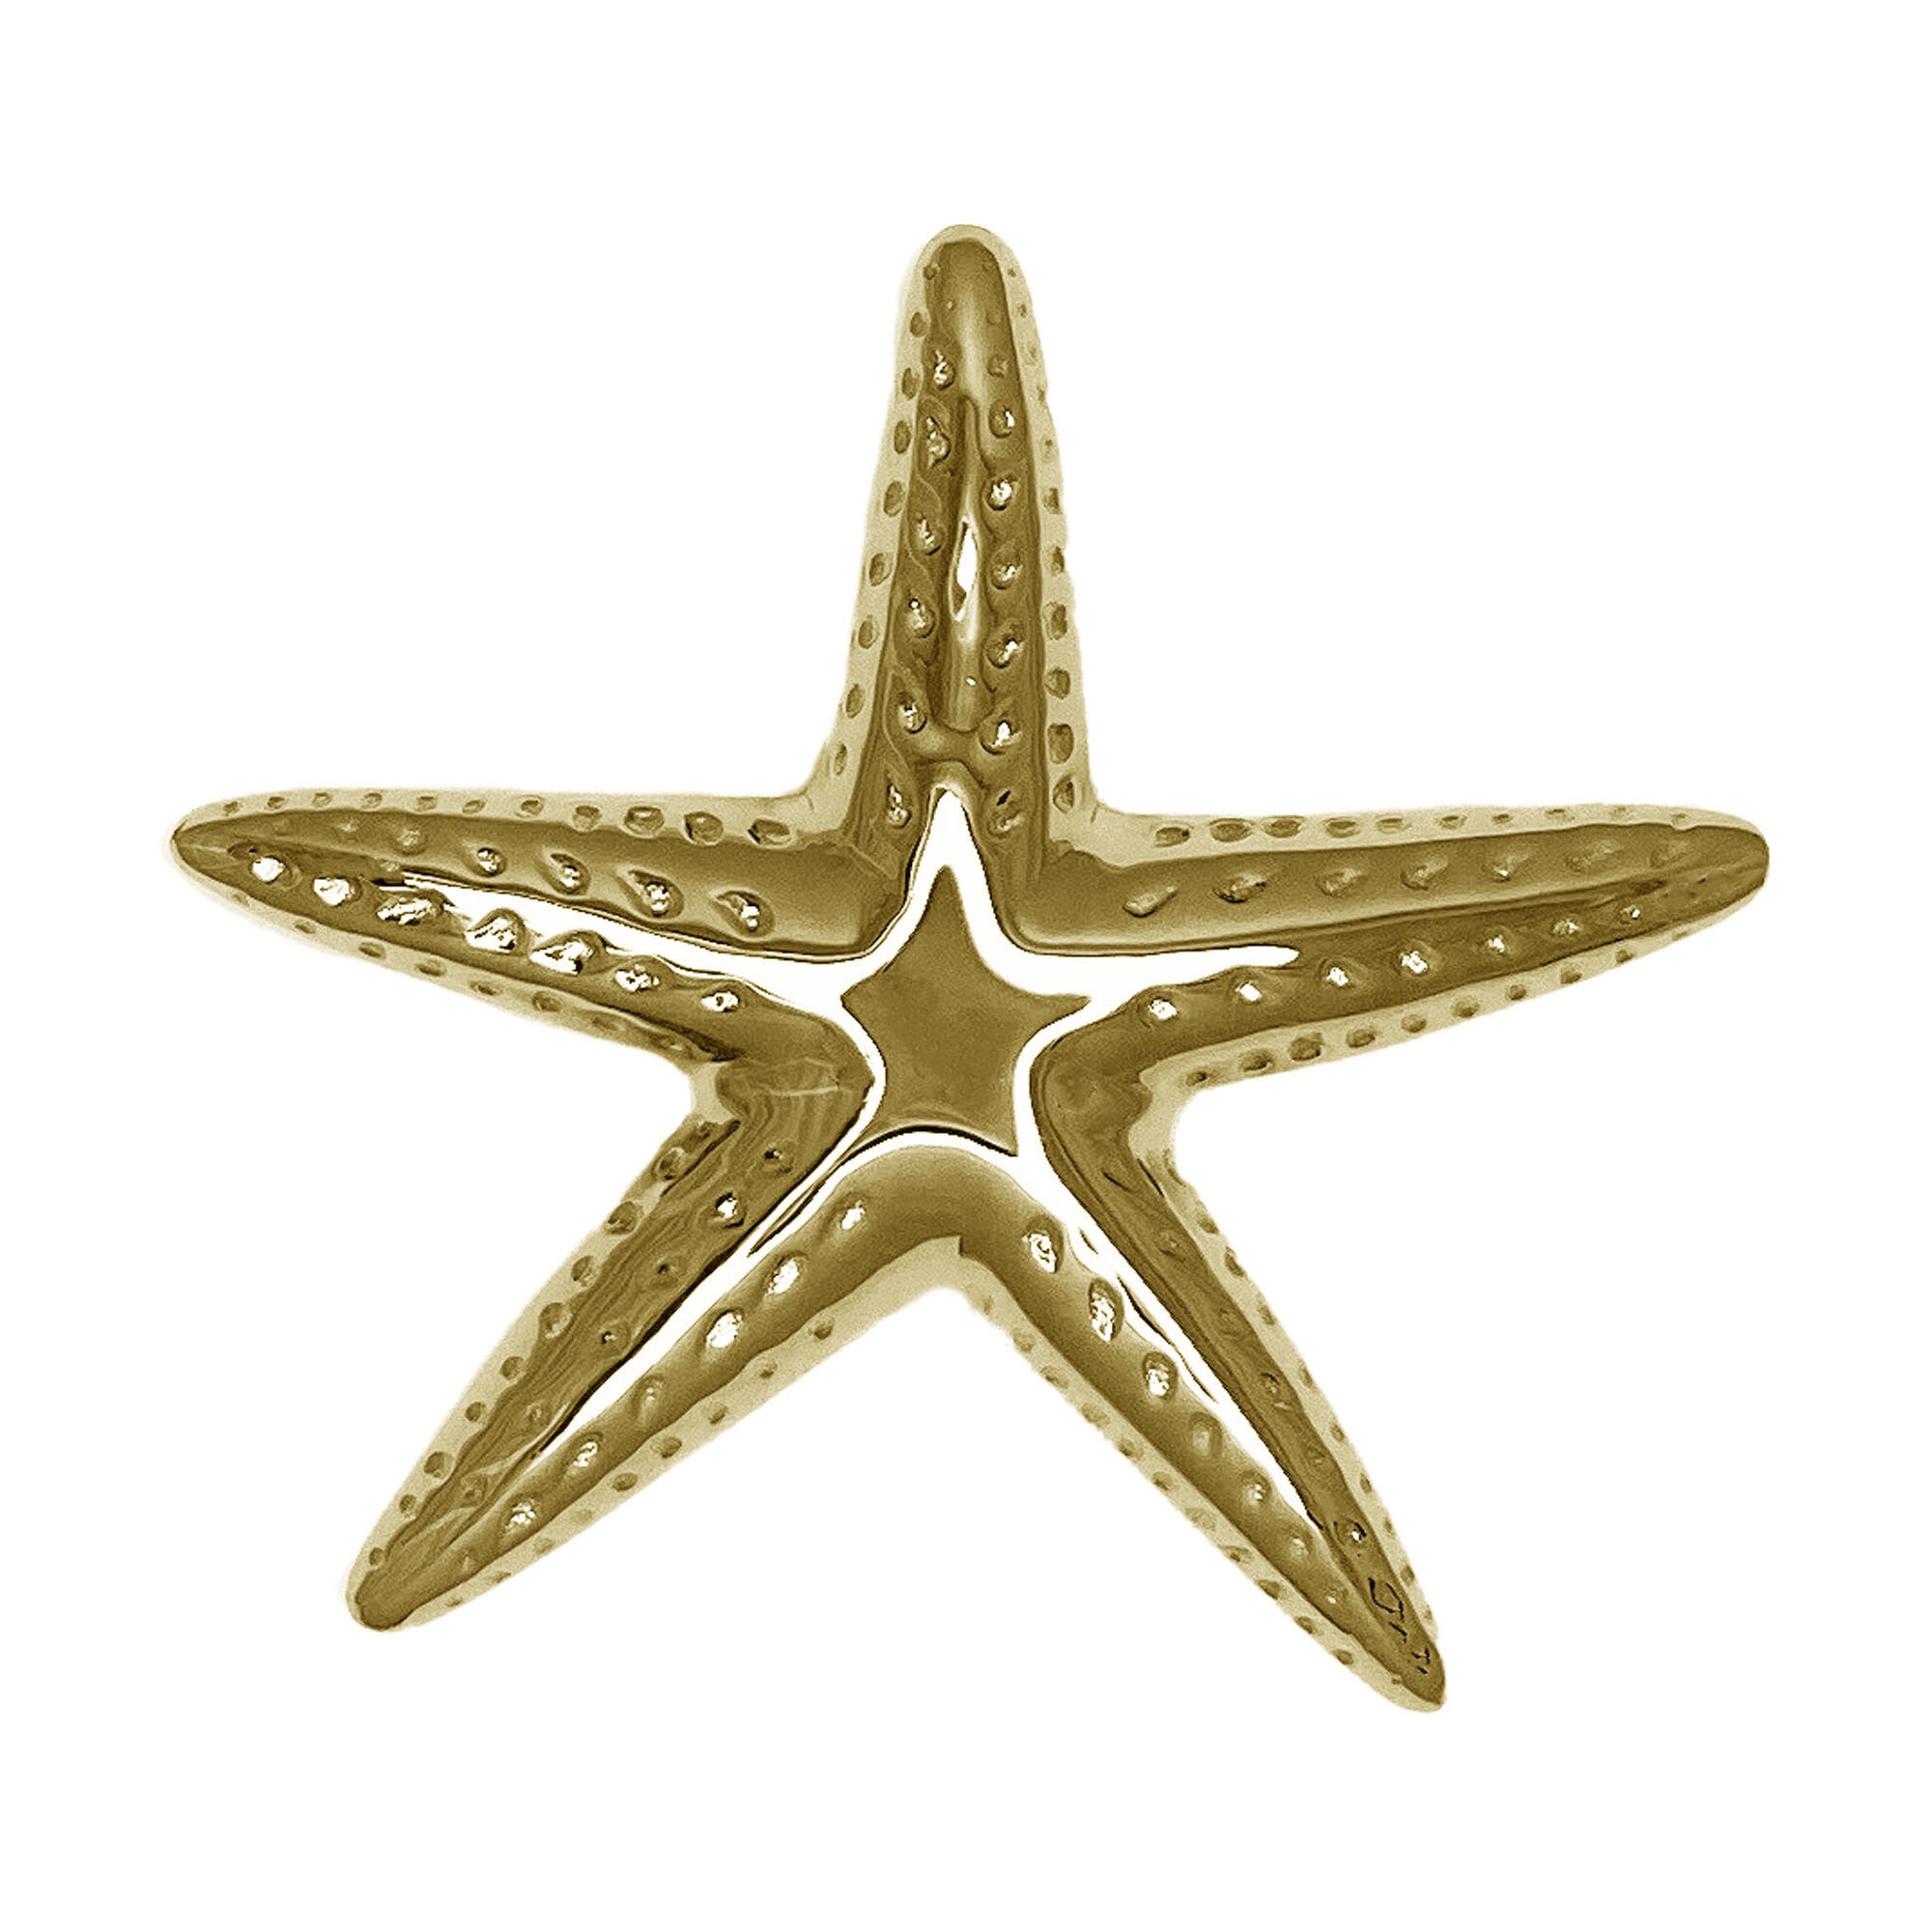 Michael Healy Solid Brass Starfish Door Knocker in Polished Finish